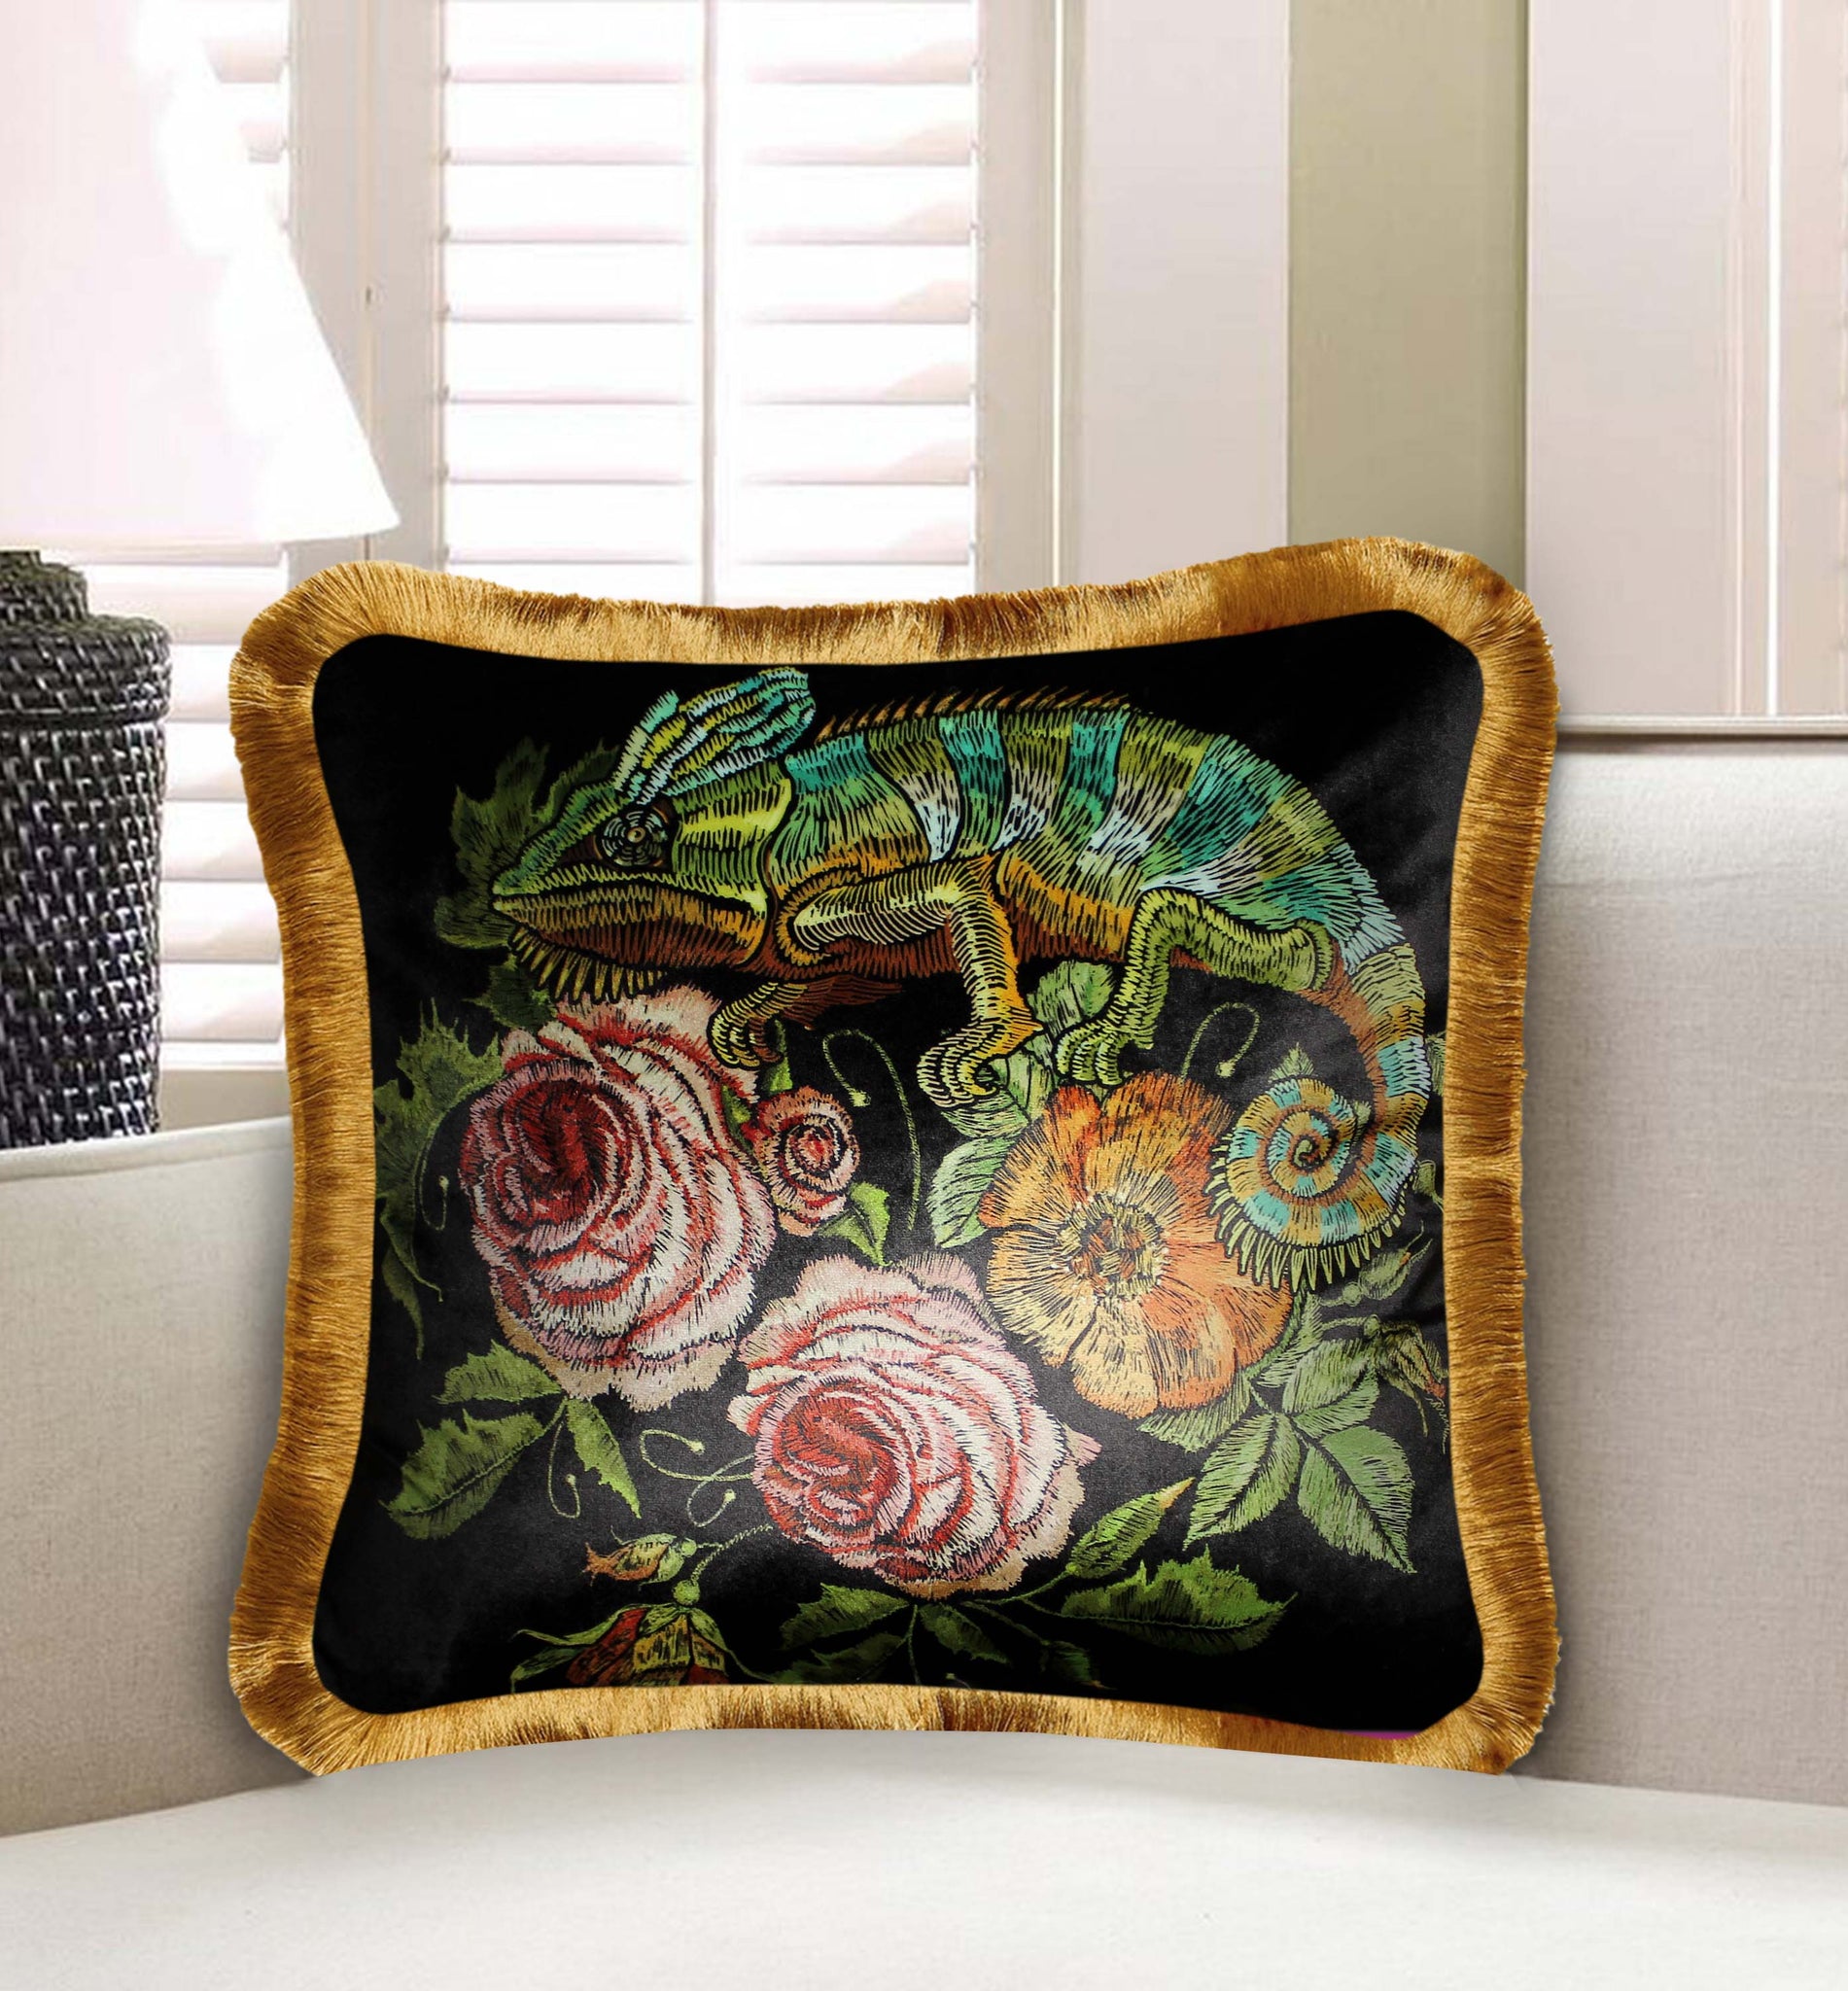 Velvet Cushion Cover Embroidery Imitated Chameleon Decorative pillowcase Exotic Animal and Rose Throw Pillow for Sofa Chair 45x45cm 18x18 Inches